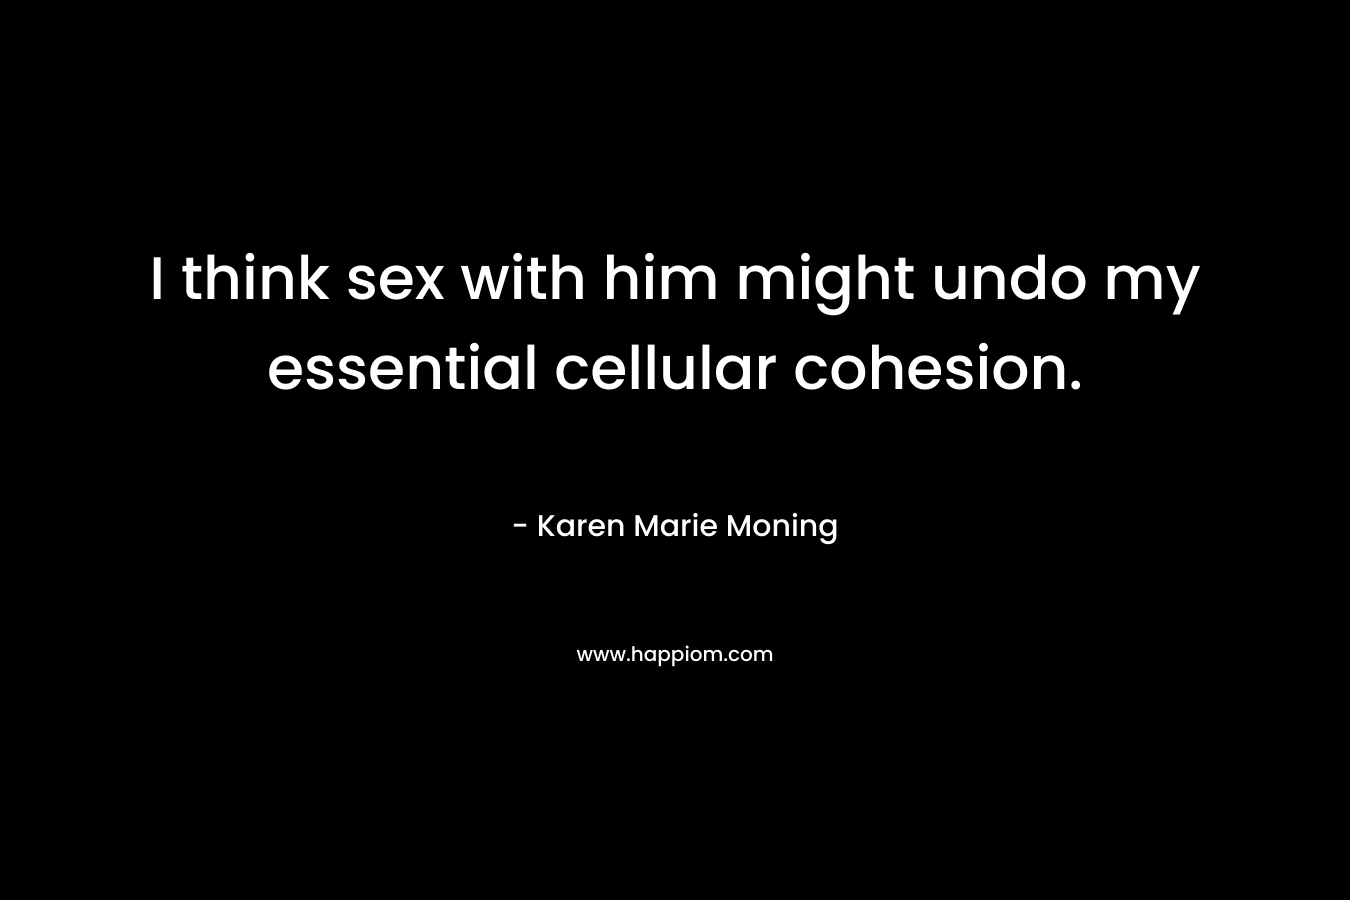 I think sex with him might undo my essential cellular cohesion.